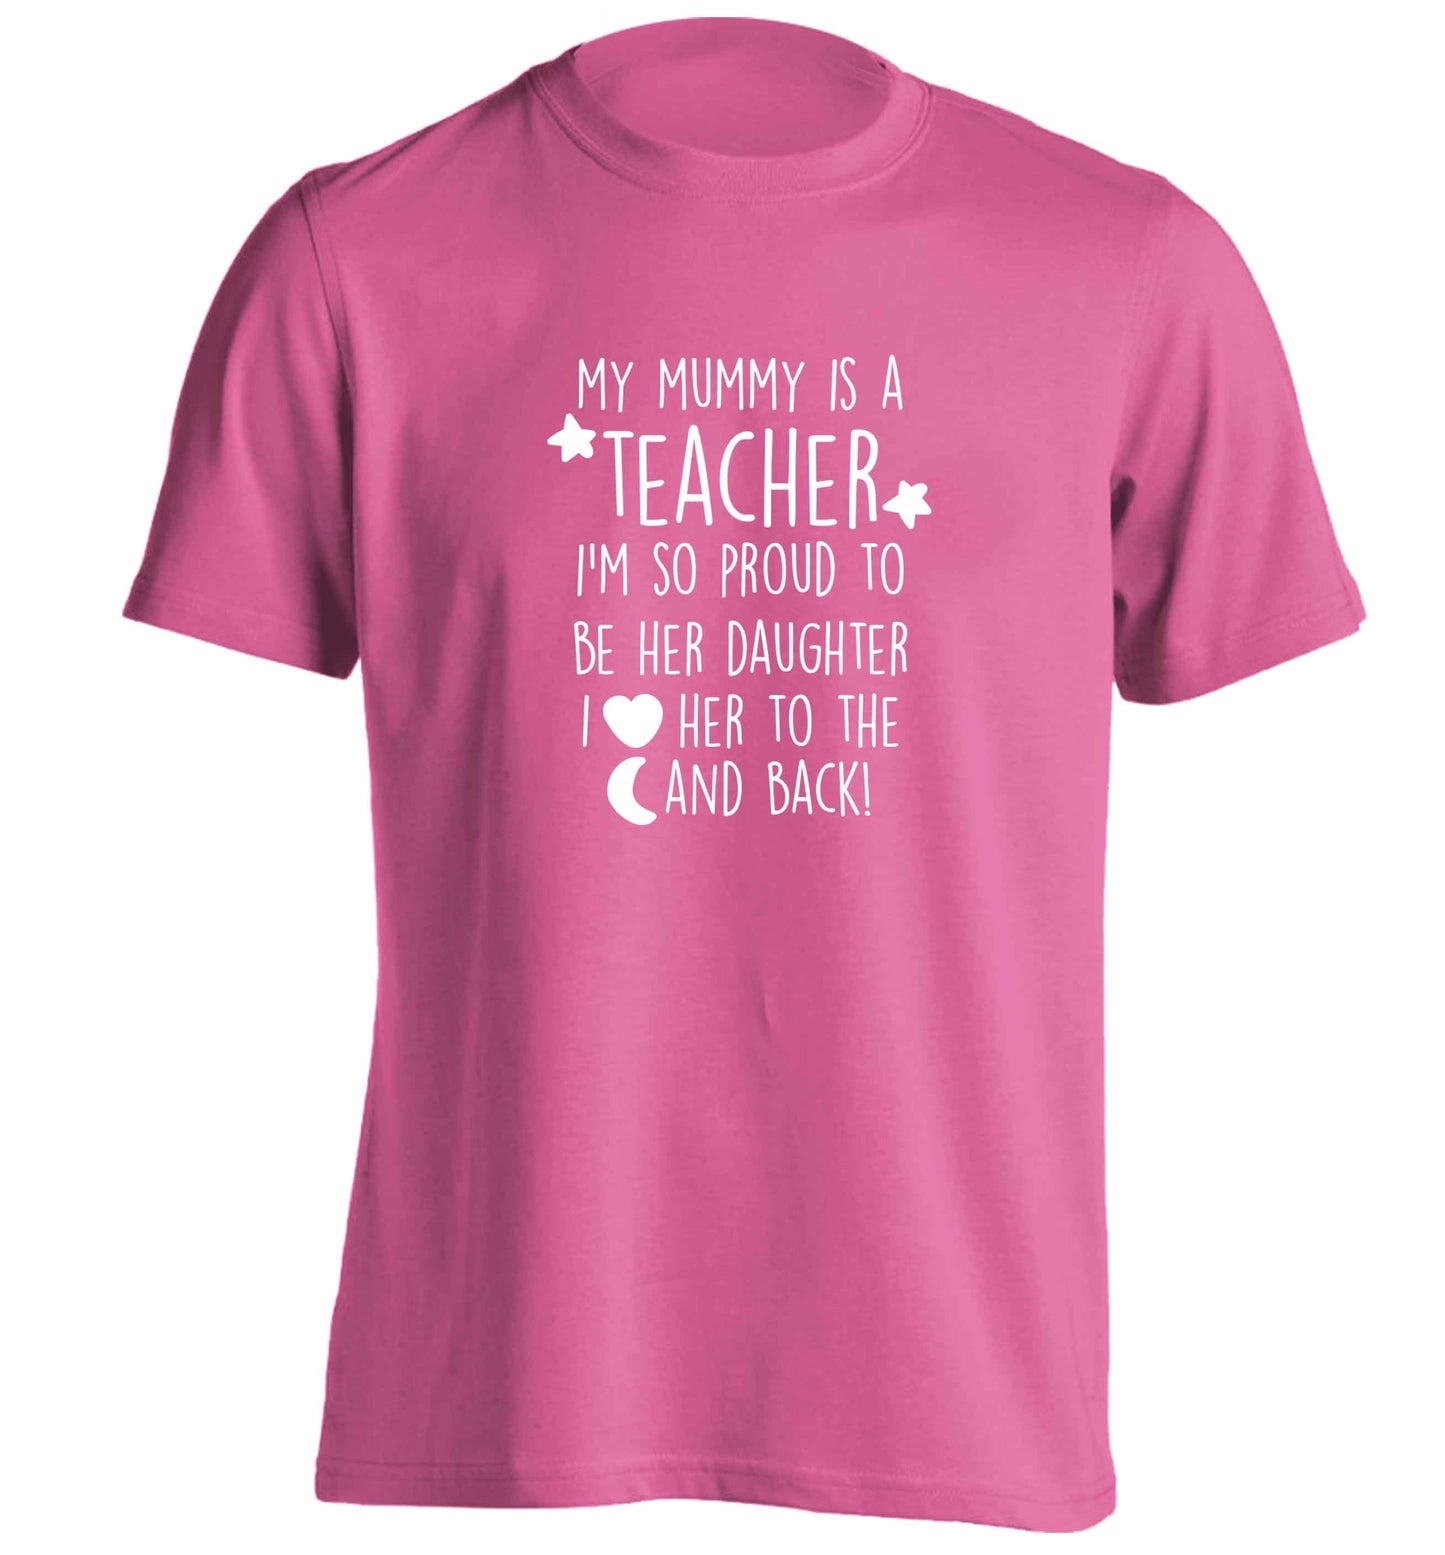 My mummy is a teacher I'm so proud to be her daughter I love her to the moon and back adults unisex pink Tshirt 2XL